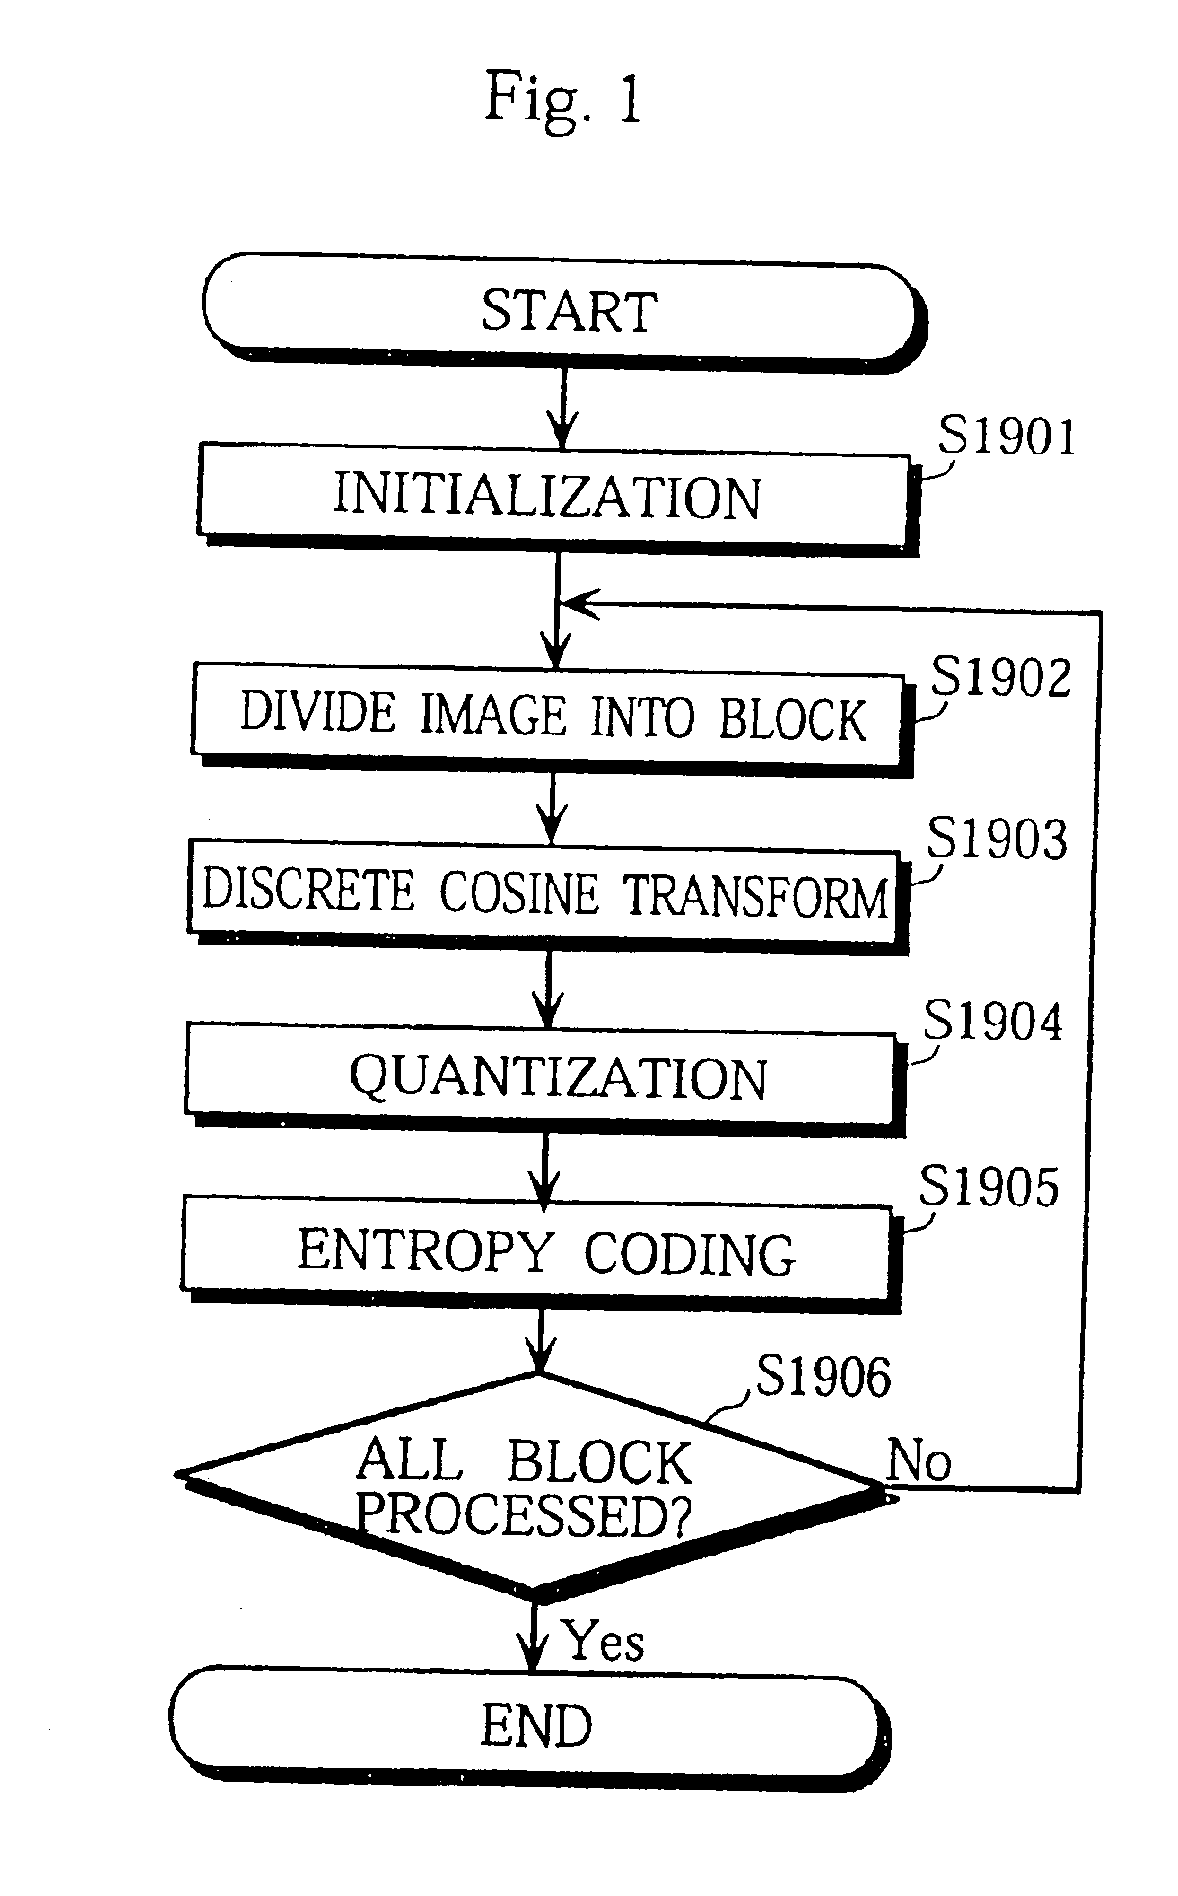 Image coding and decoding apparatus, method of image coding and decoding, and recording medium for recording program for image coding and decoding